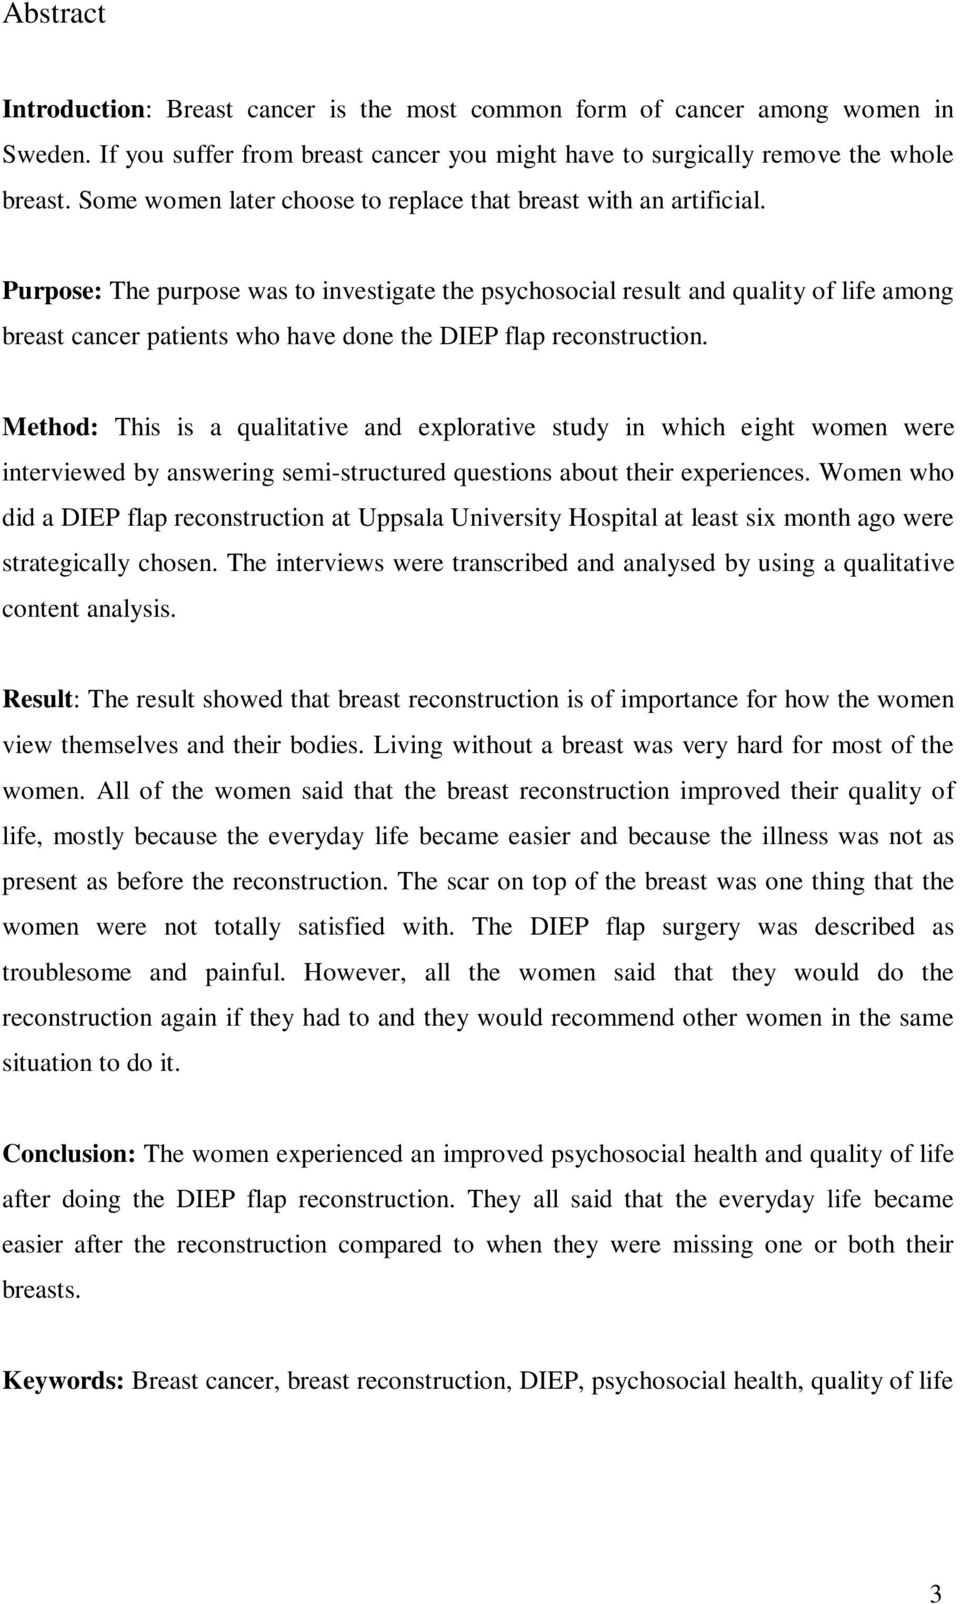 Purpose: The purpose was to investigate the psychosocial result and quality of life among breast cancer patients who have done the DIEP flap reconstruction.